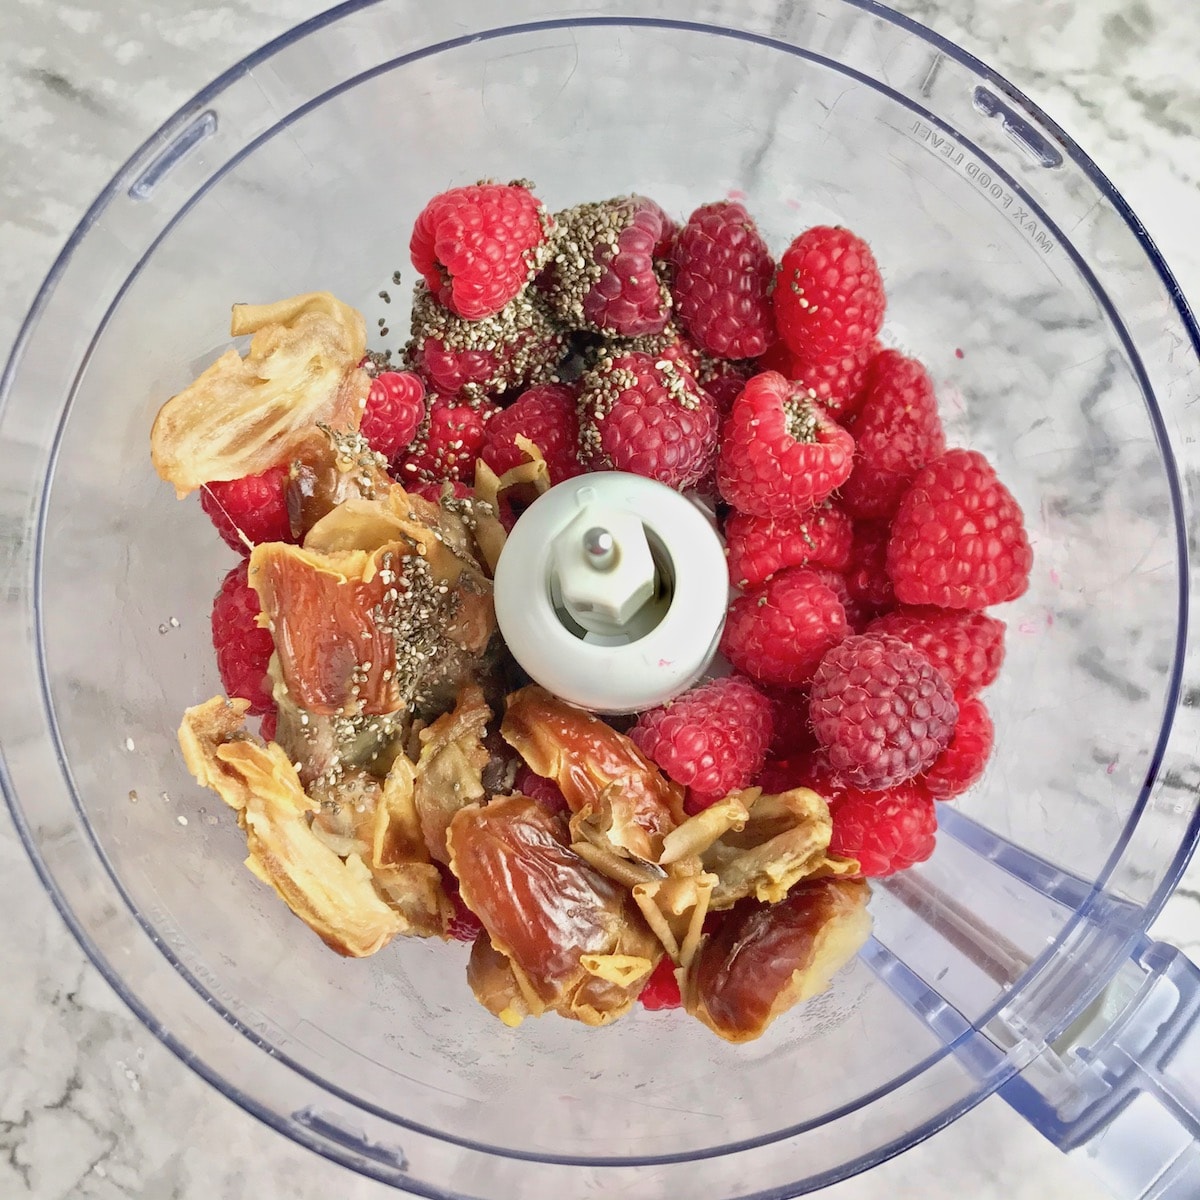 Raspberries, dates, and chia seeds in a food processor.